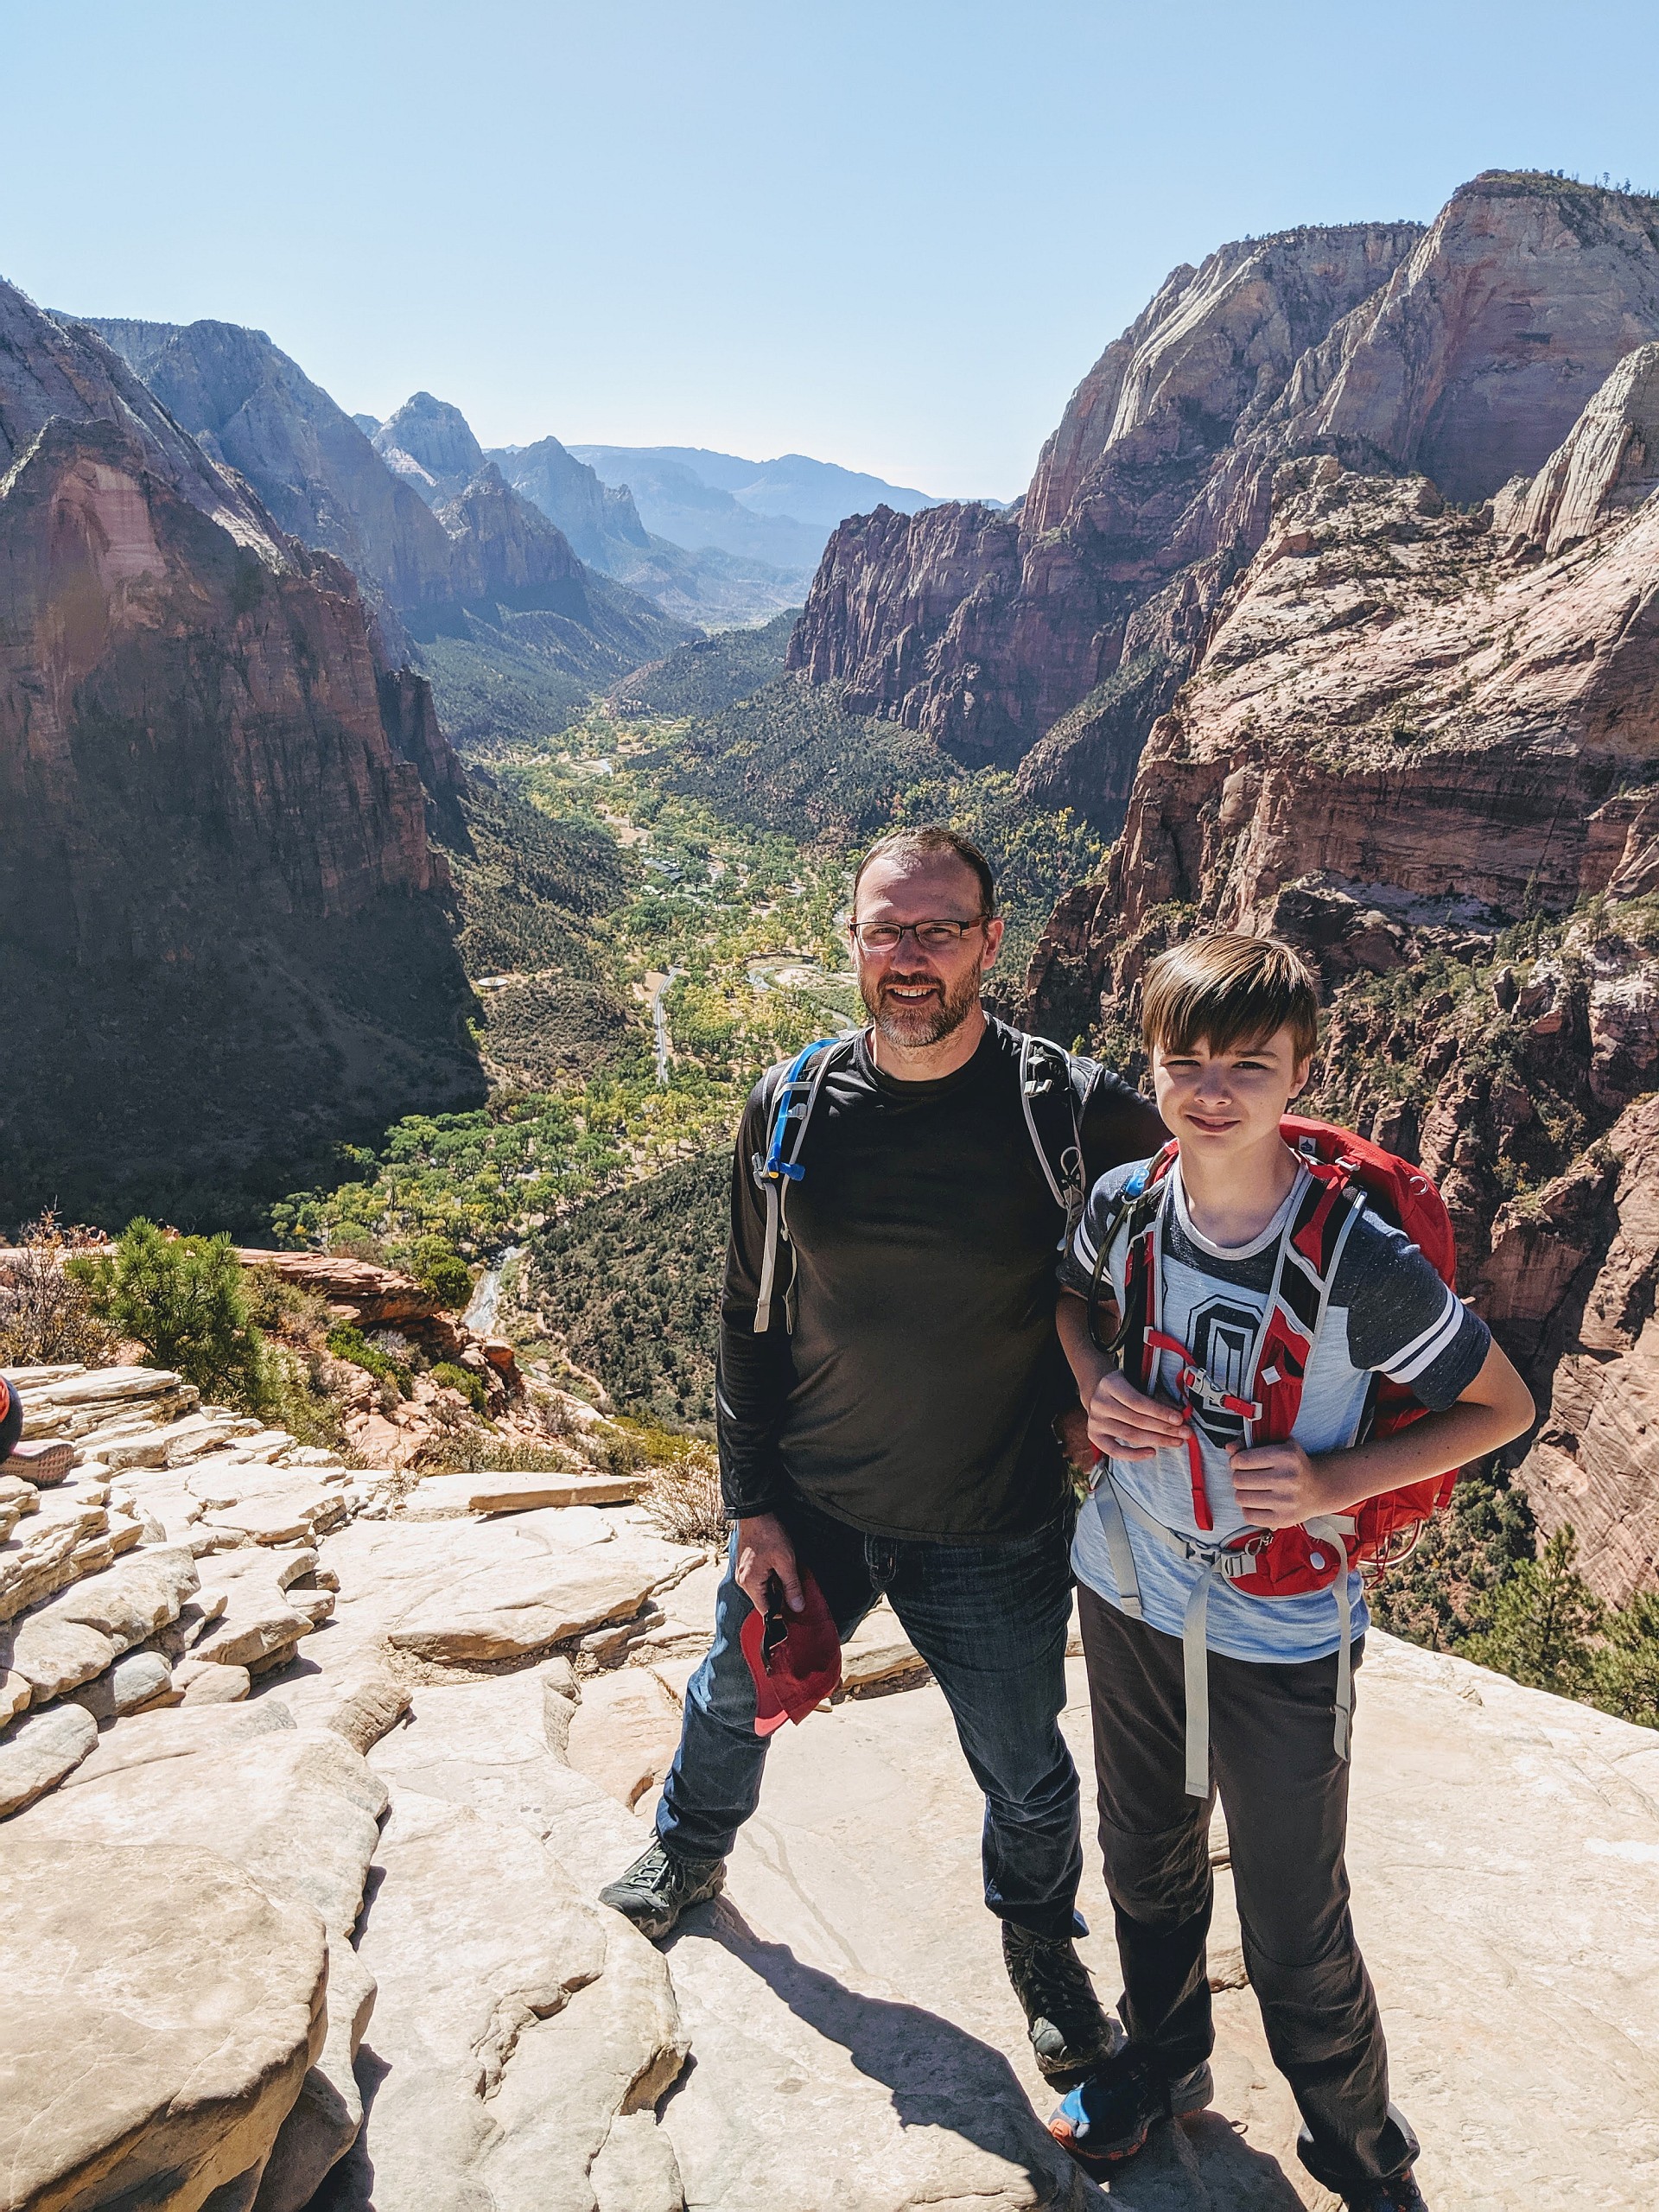 Dr Richards and son Ian atop Angel's Landing in Zion National Park in Utah.